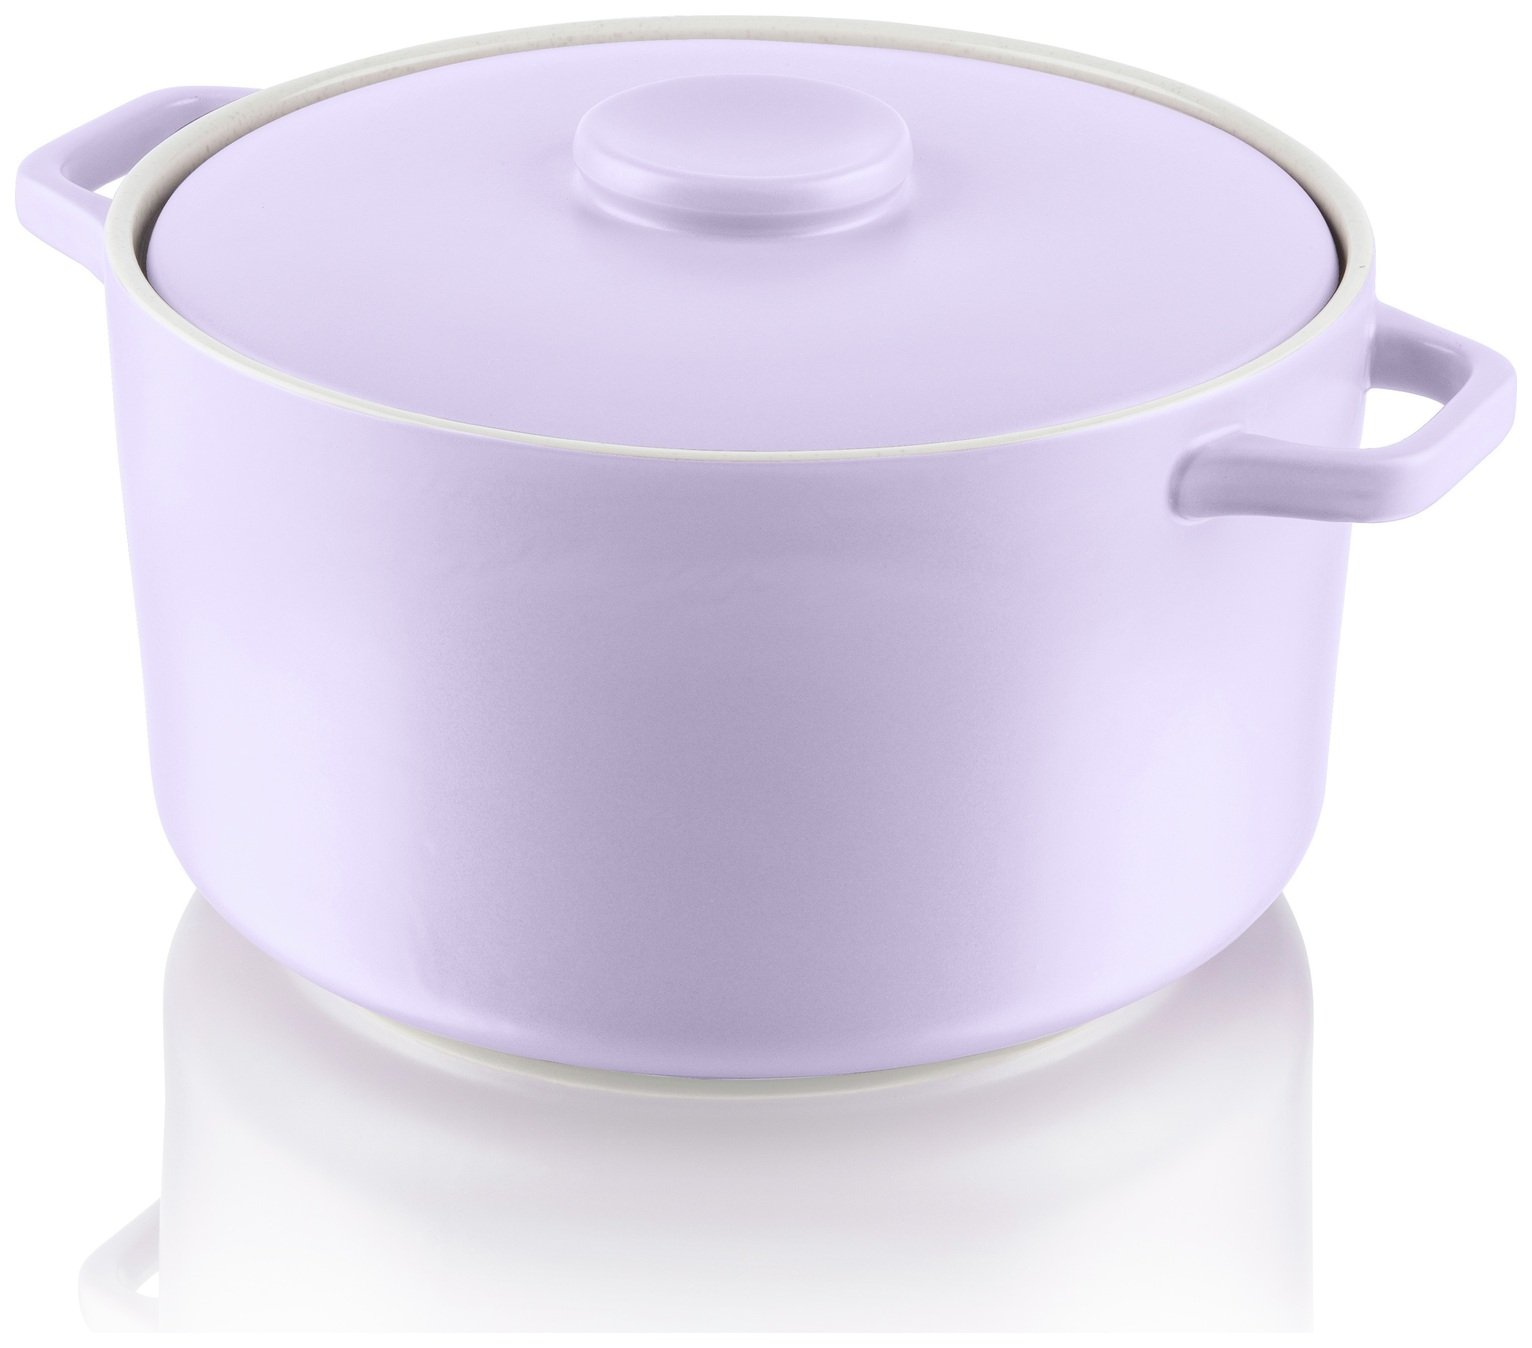 Fearne by Swan Large Round Casserole Dish - Lilac